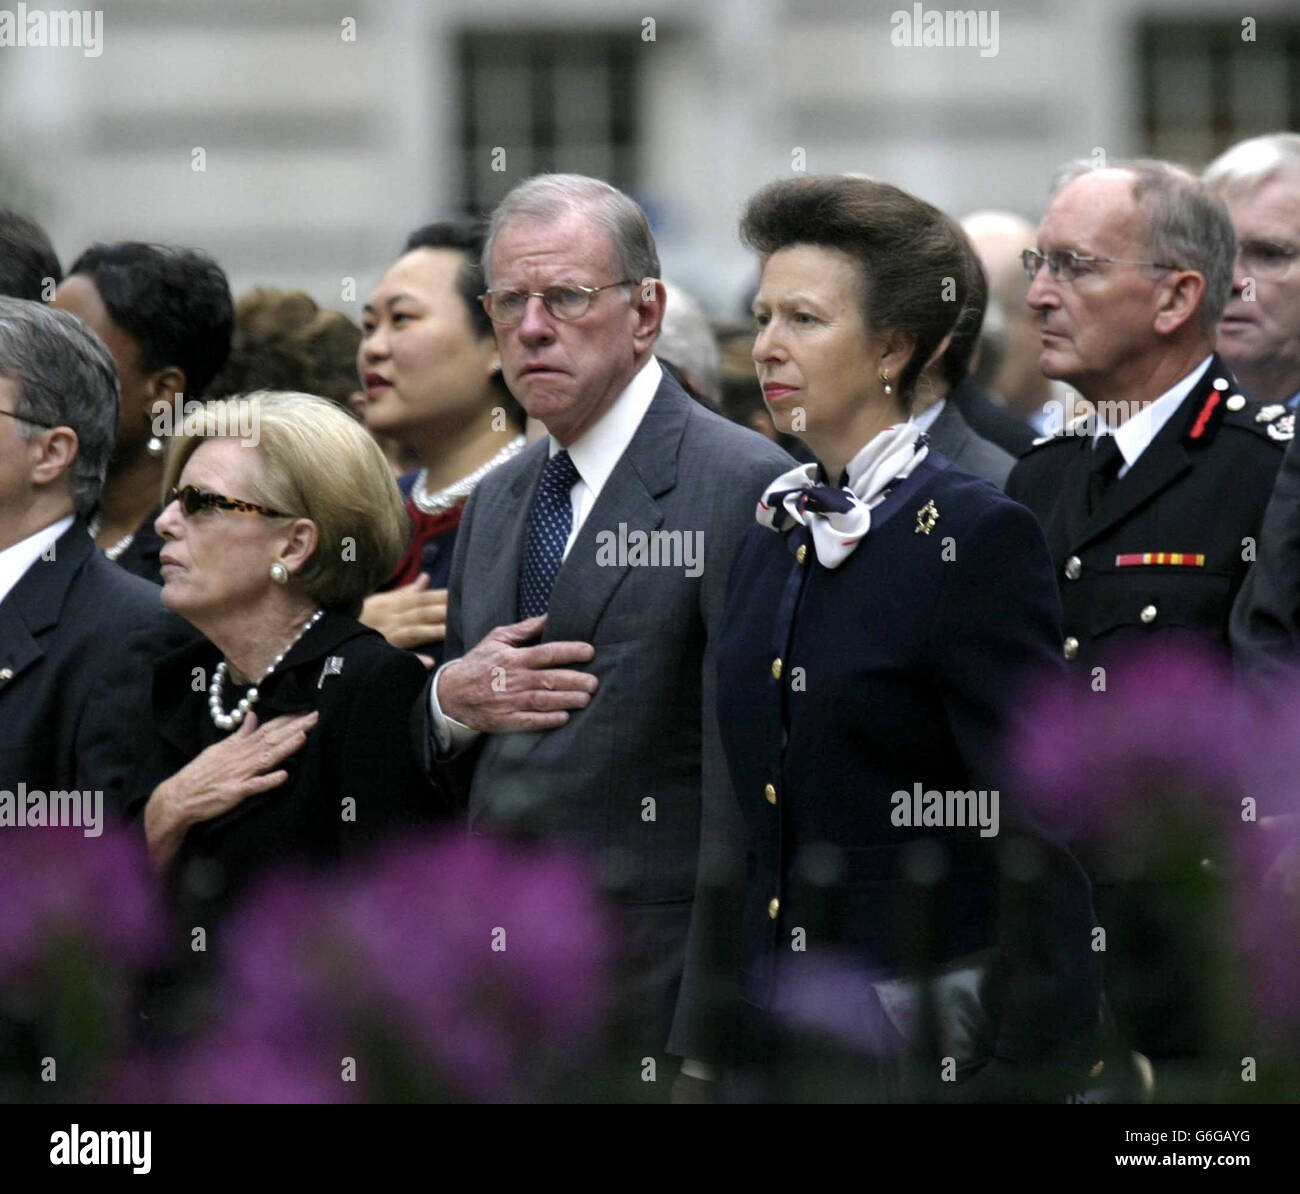 The Princess Royal with US ambassador William Farish and his wife at the memorial garden in Grosvenor Square, London, dedicated to the memory of those who died when two hijacked passenger jets that crashed into the twin towers of New York's World Trade Centre. * The garden of remembrance contains a small pavilion bearing three bronze plaques, listing the names of victims for the UK, UK Overseas Territories and those with dual nationalities. Stock Photo